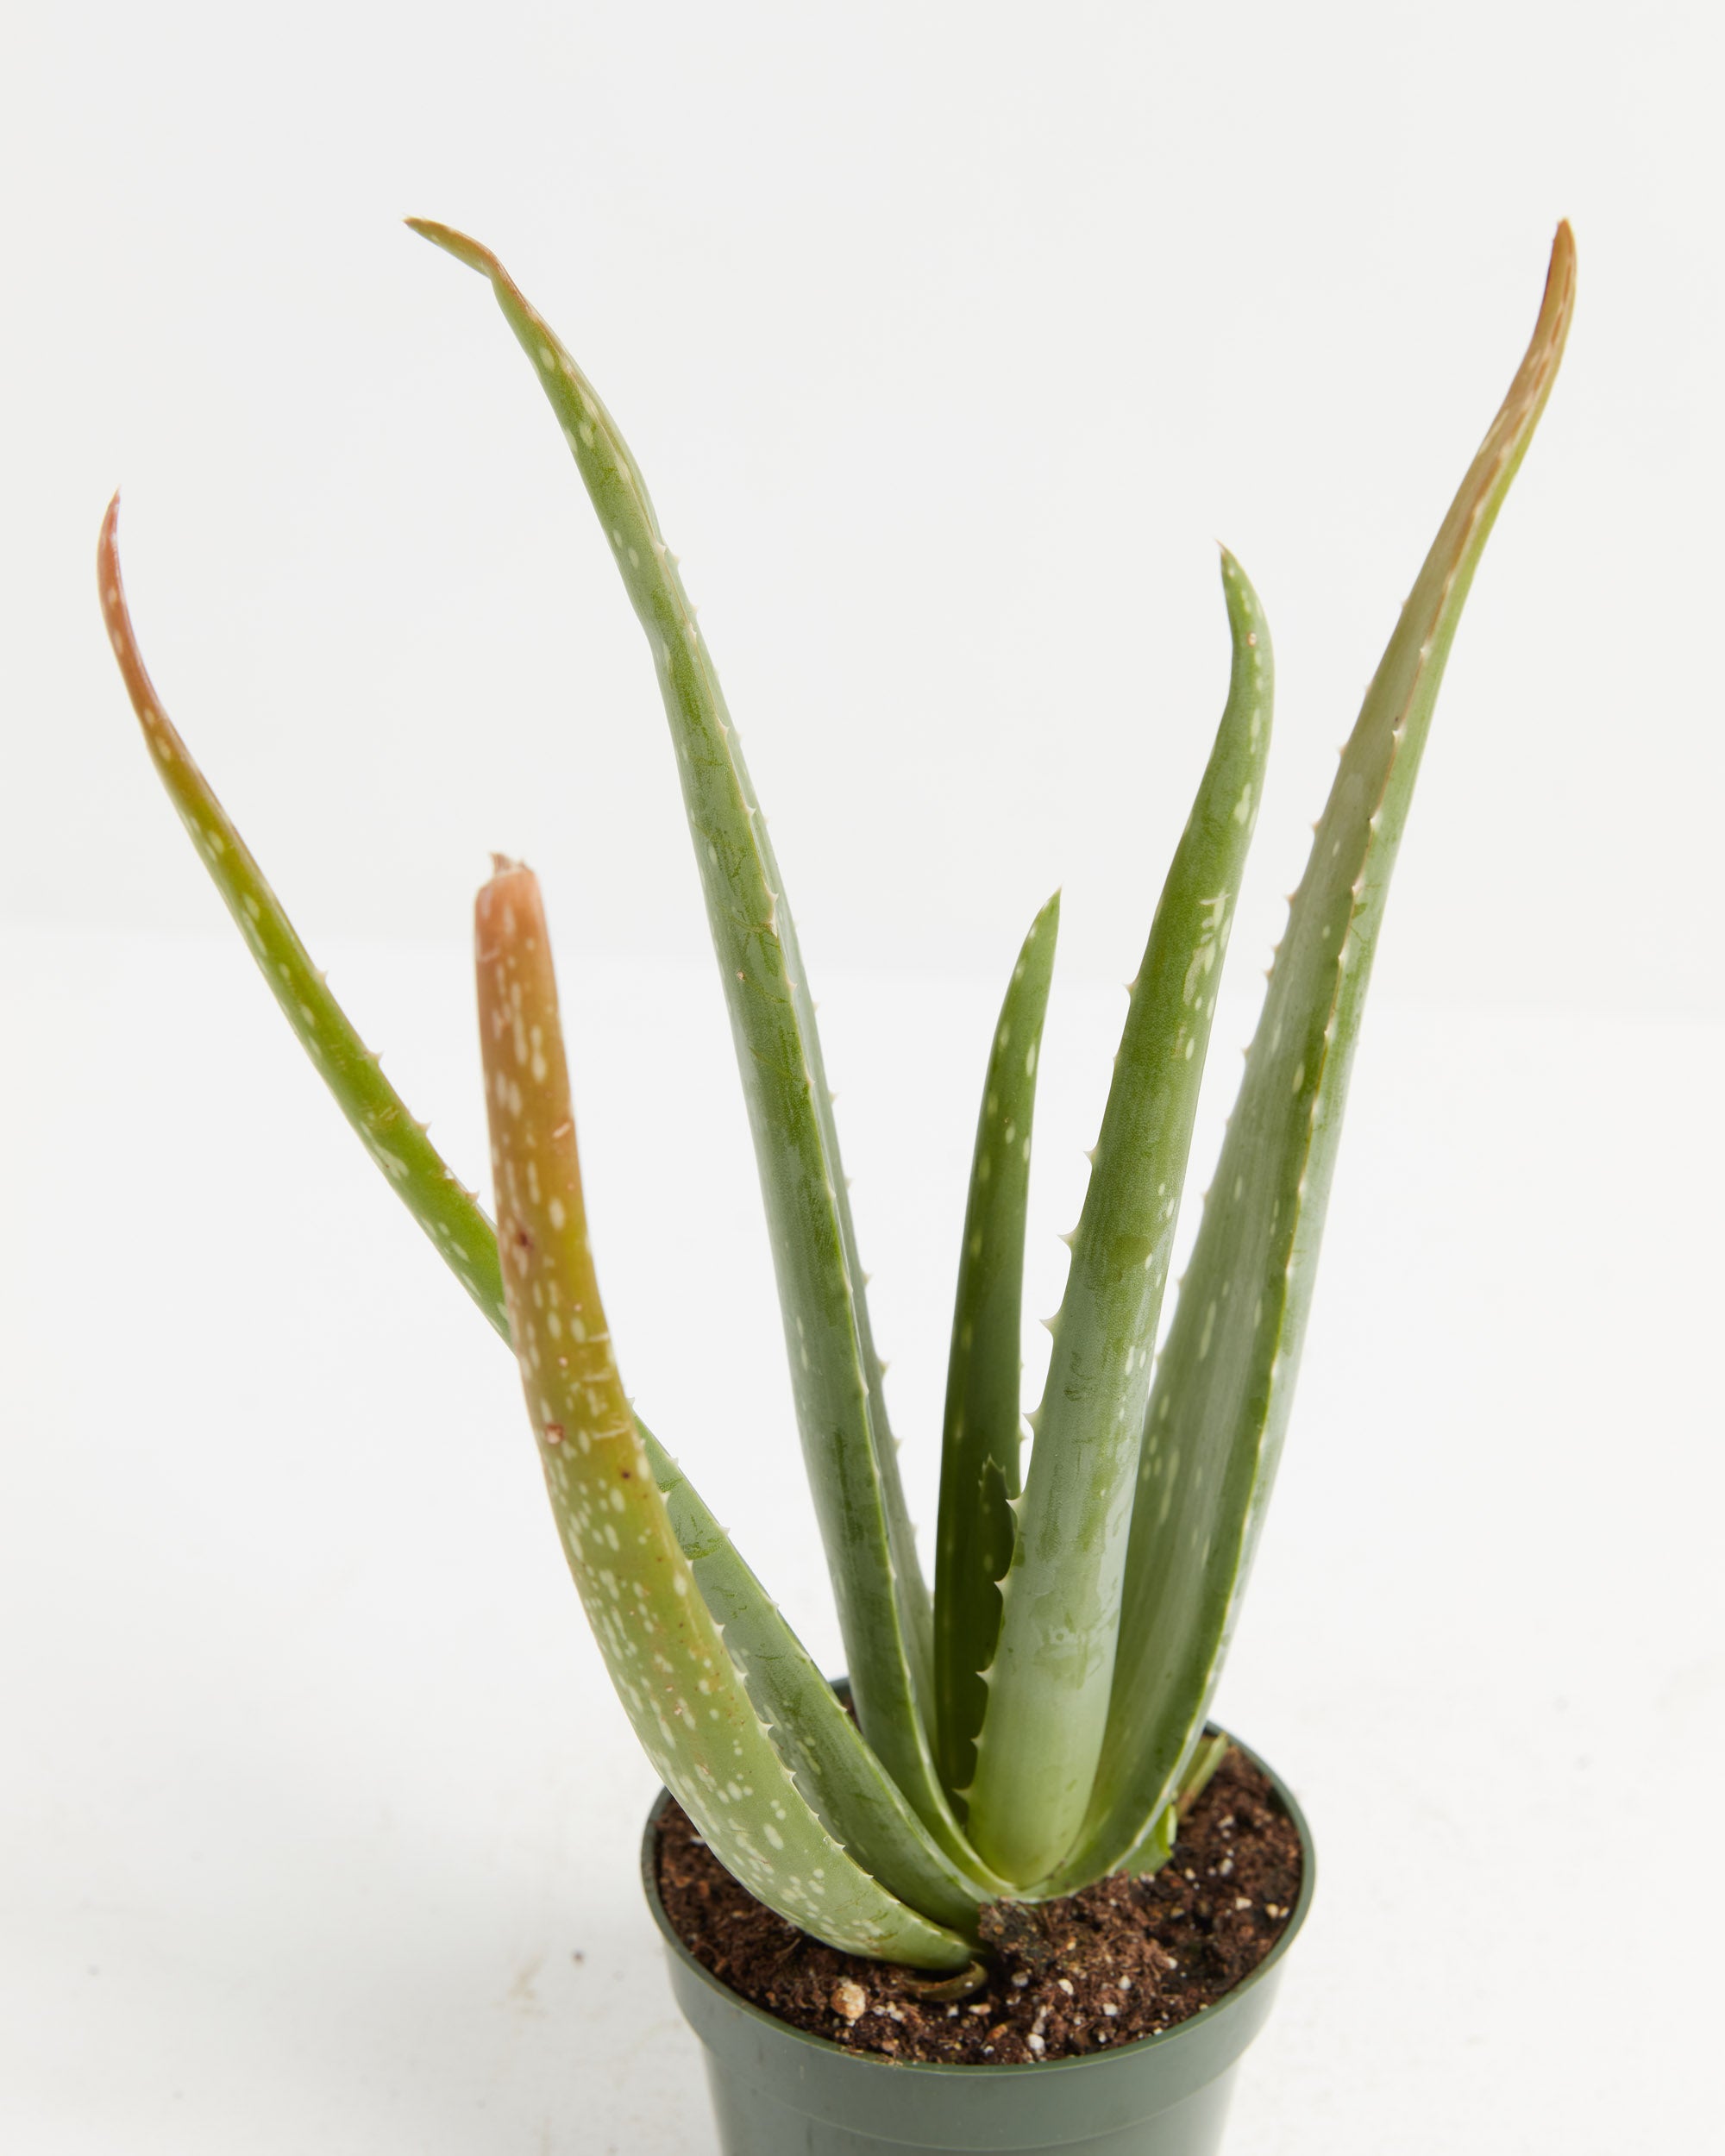 Aloe Vera for Sale - Buying & Growing Guide 